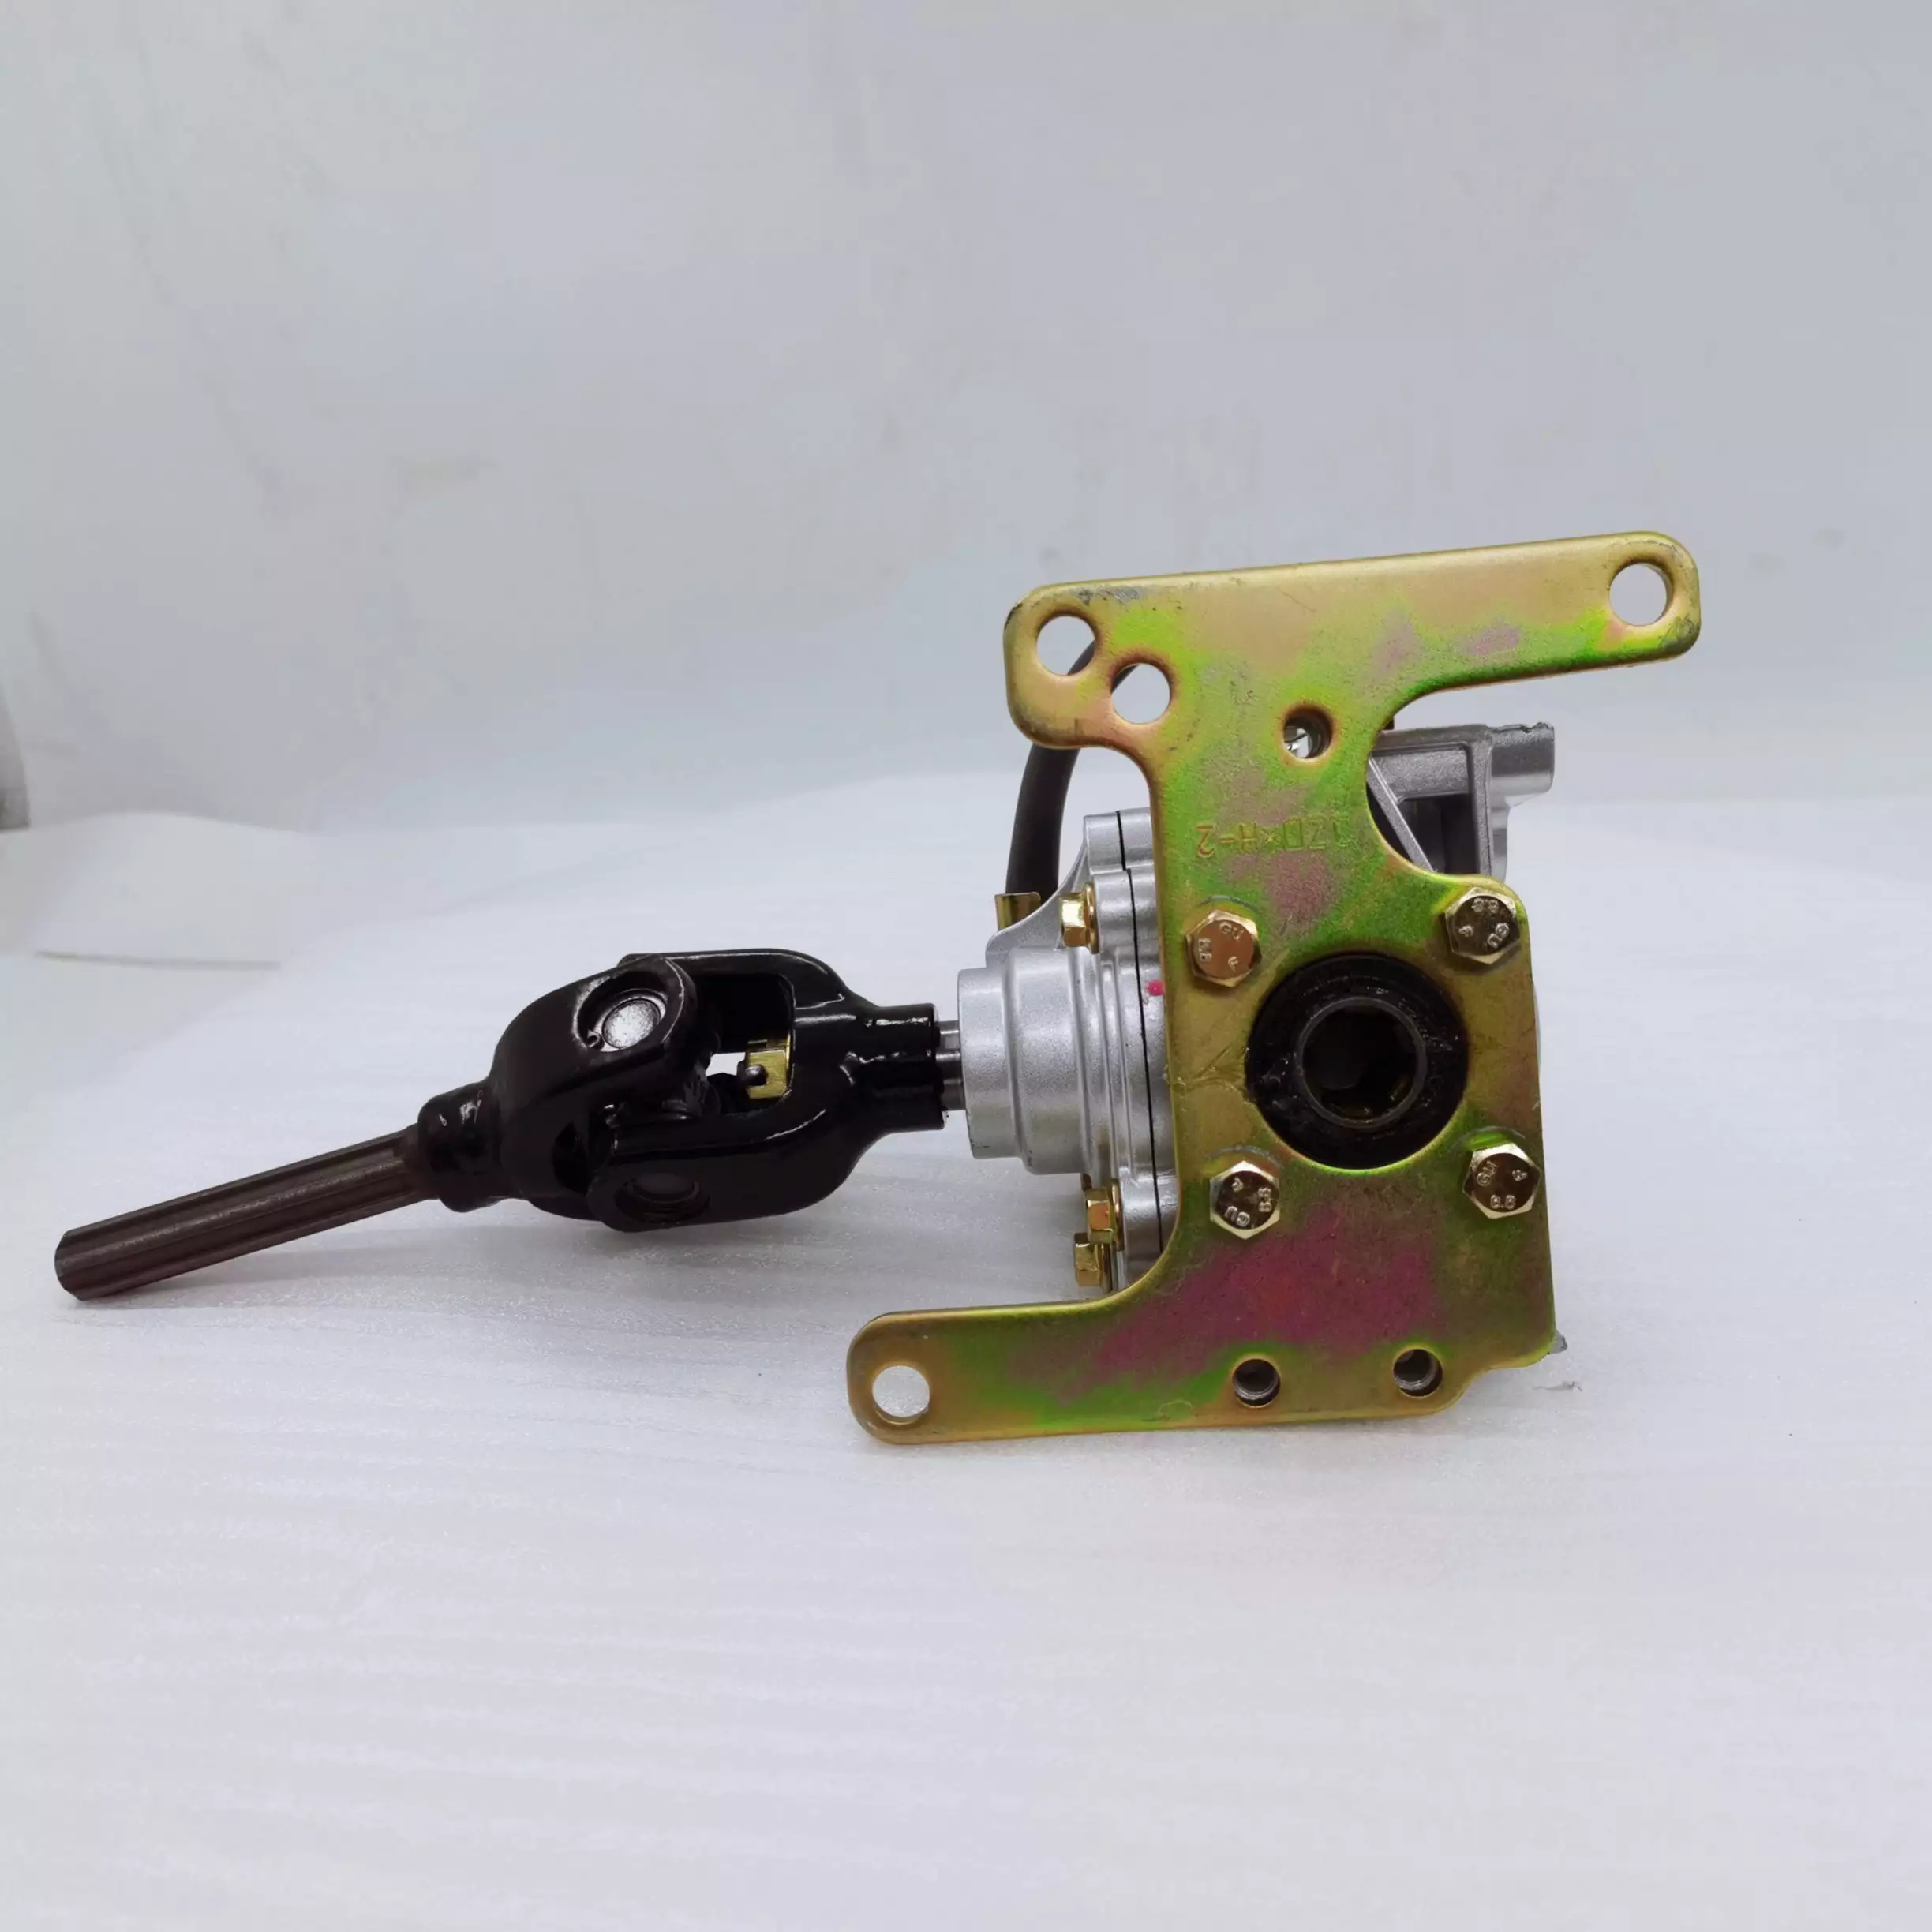 DAYANG exquisite DONGBA 110 reverse gear box for  Lifan Engine Motor Trike 3 Wheel Motorcycle Tricycle with big size base plate